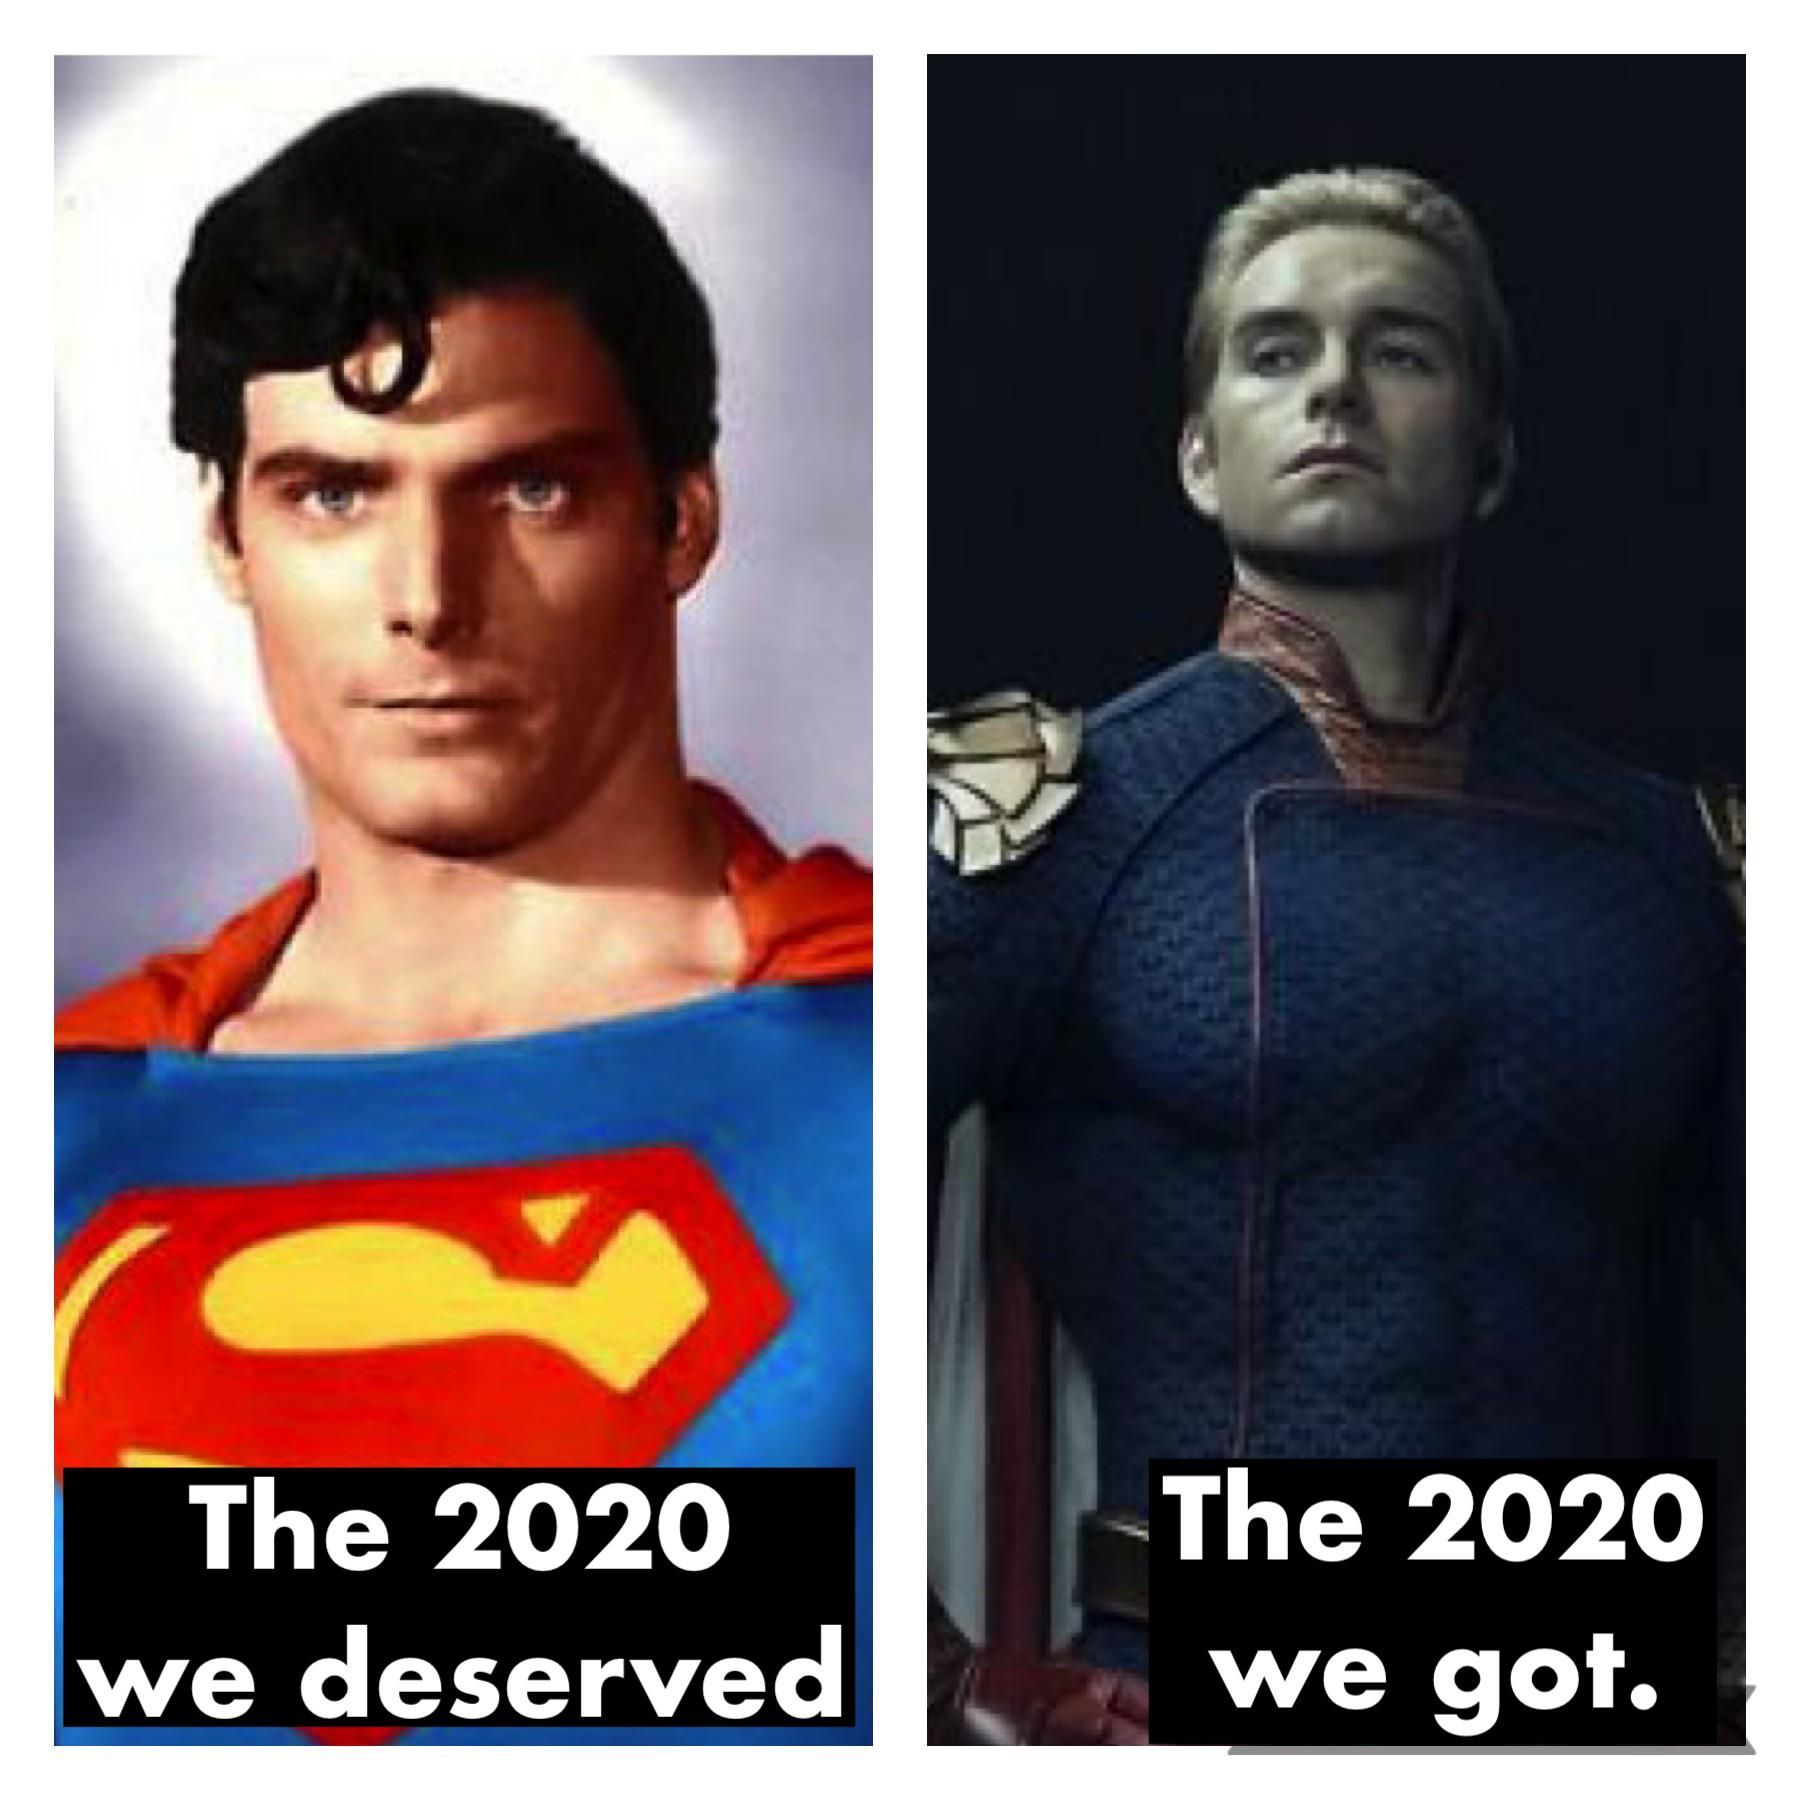 If 2020 was super heroes...